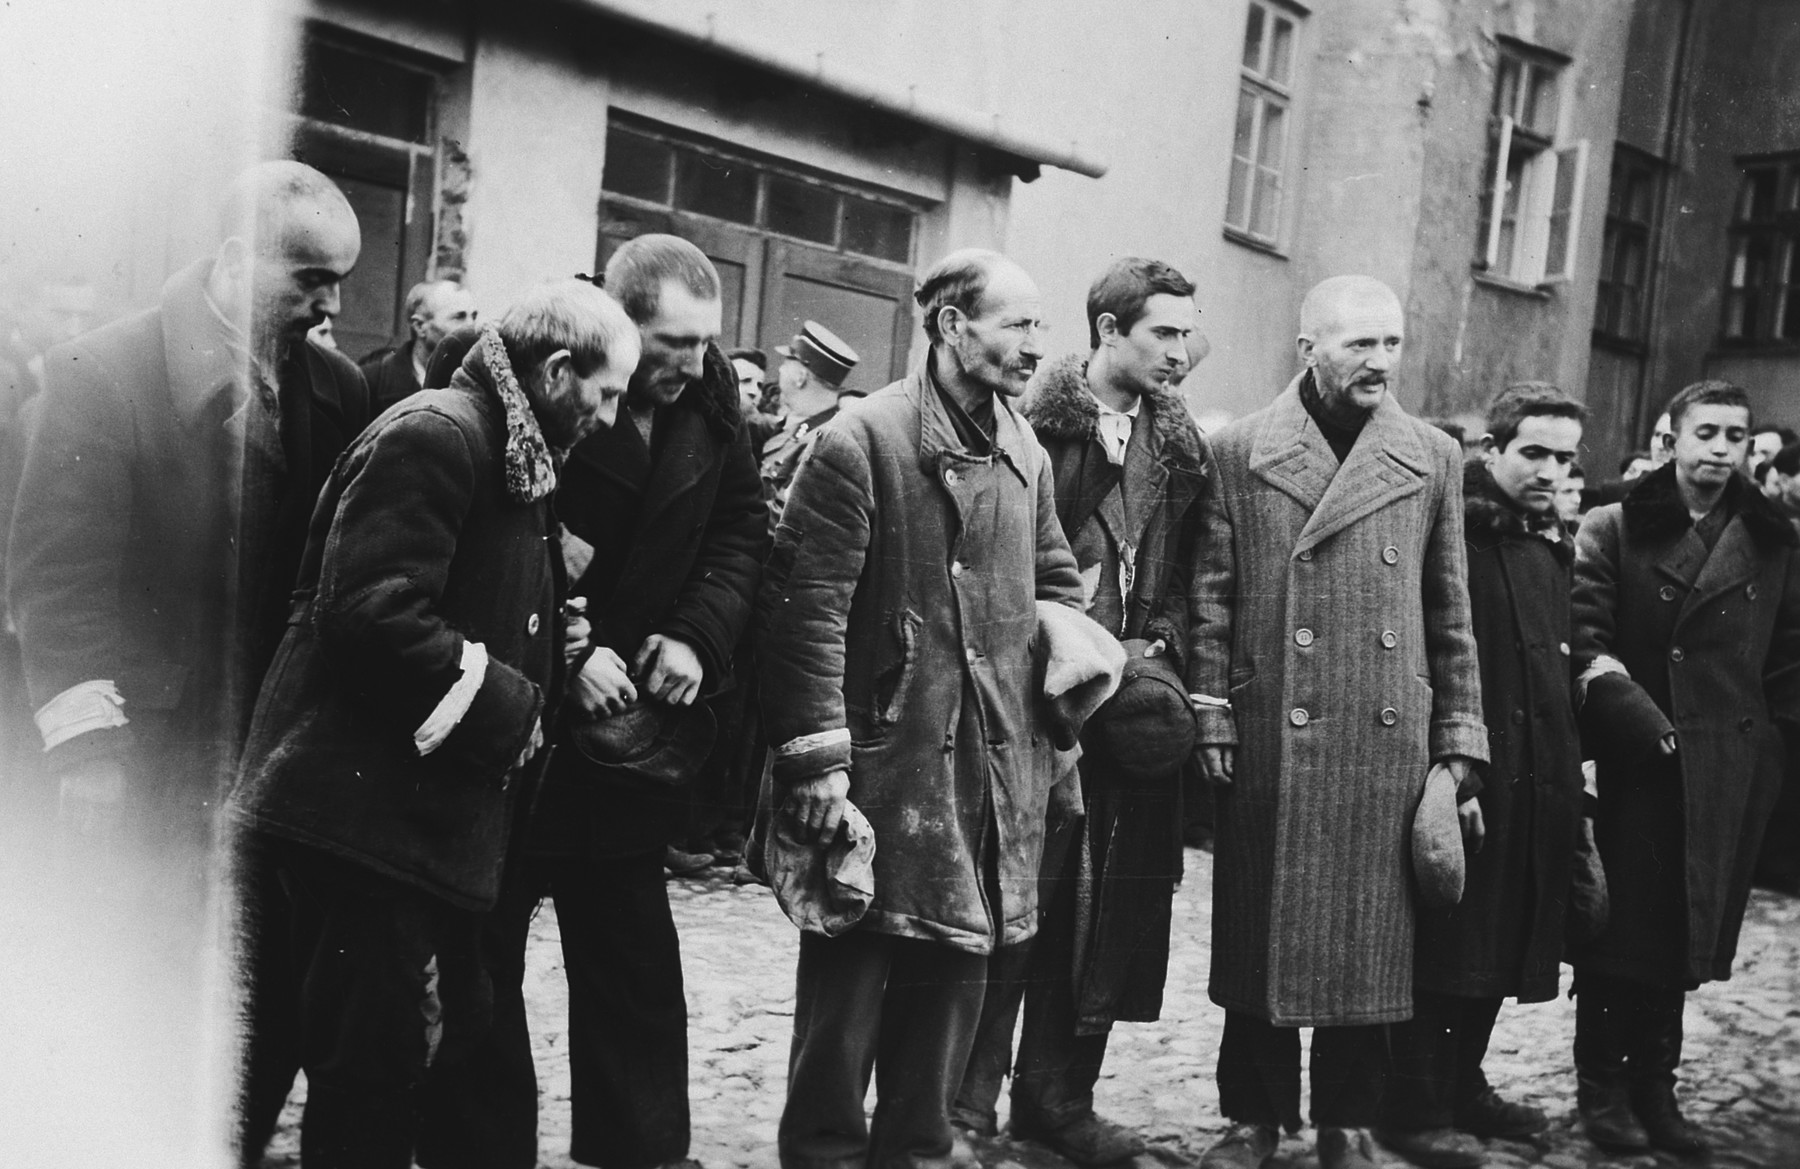 Jewish men are forced to stand in a line holding their hats in their hands [perhaps right after having had their beards forcibly shaven].